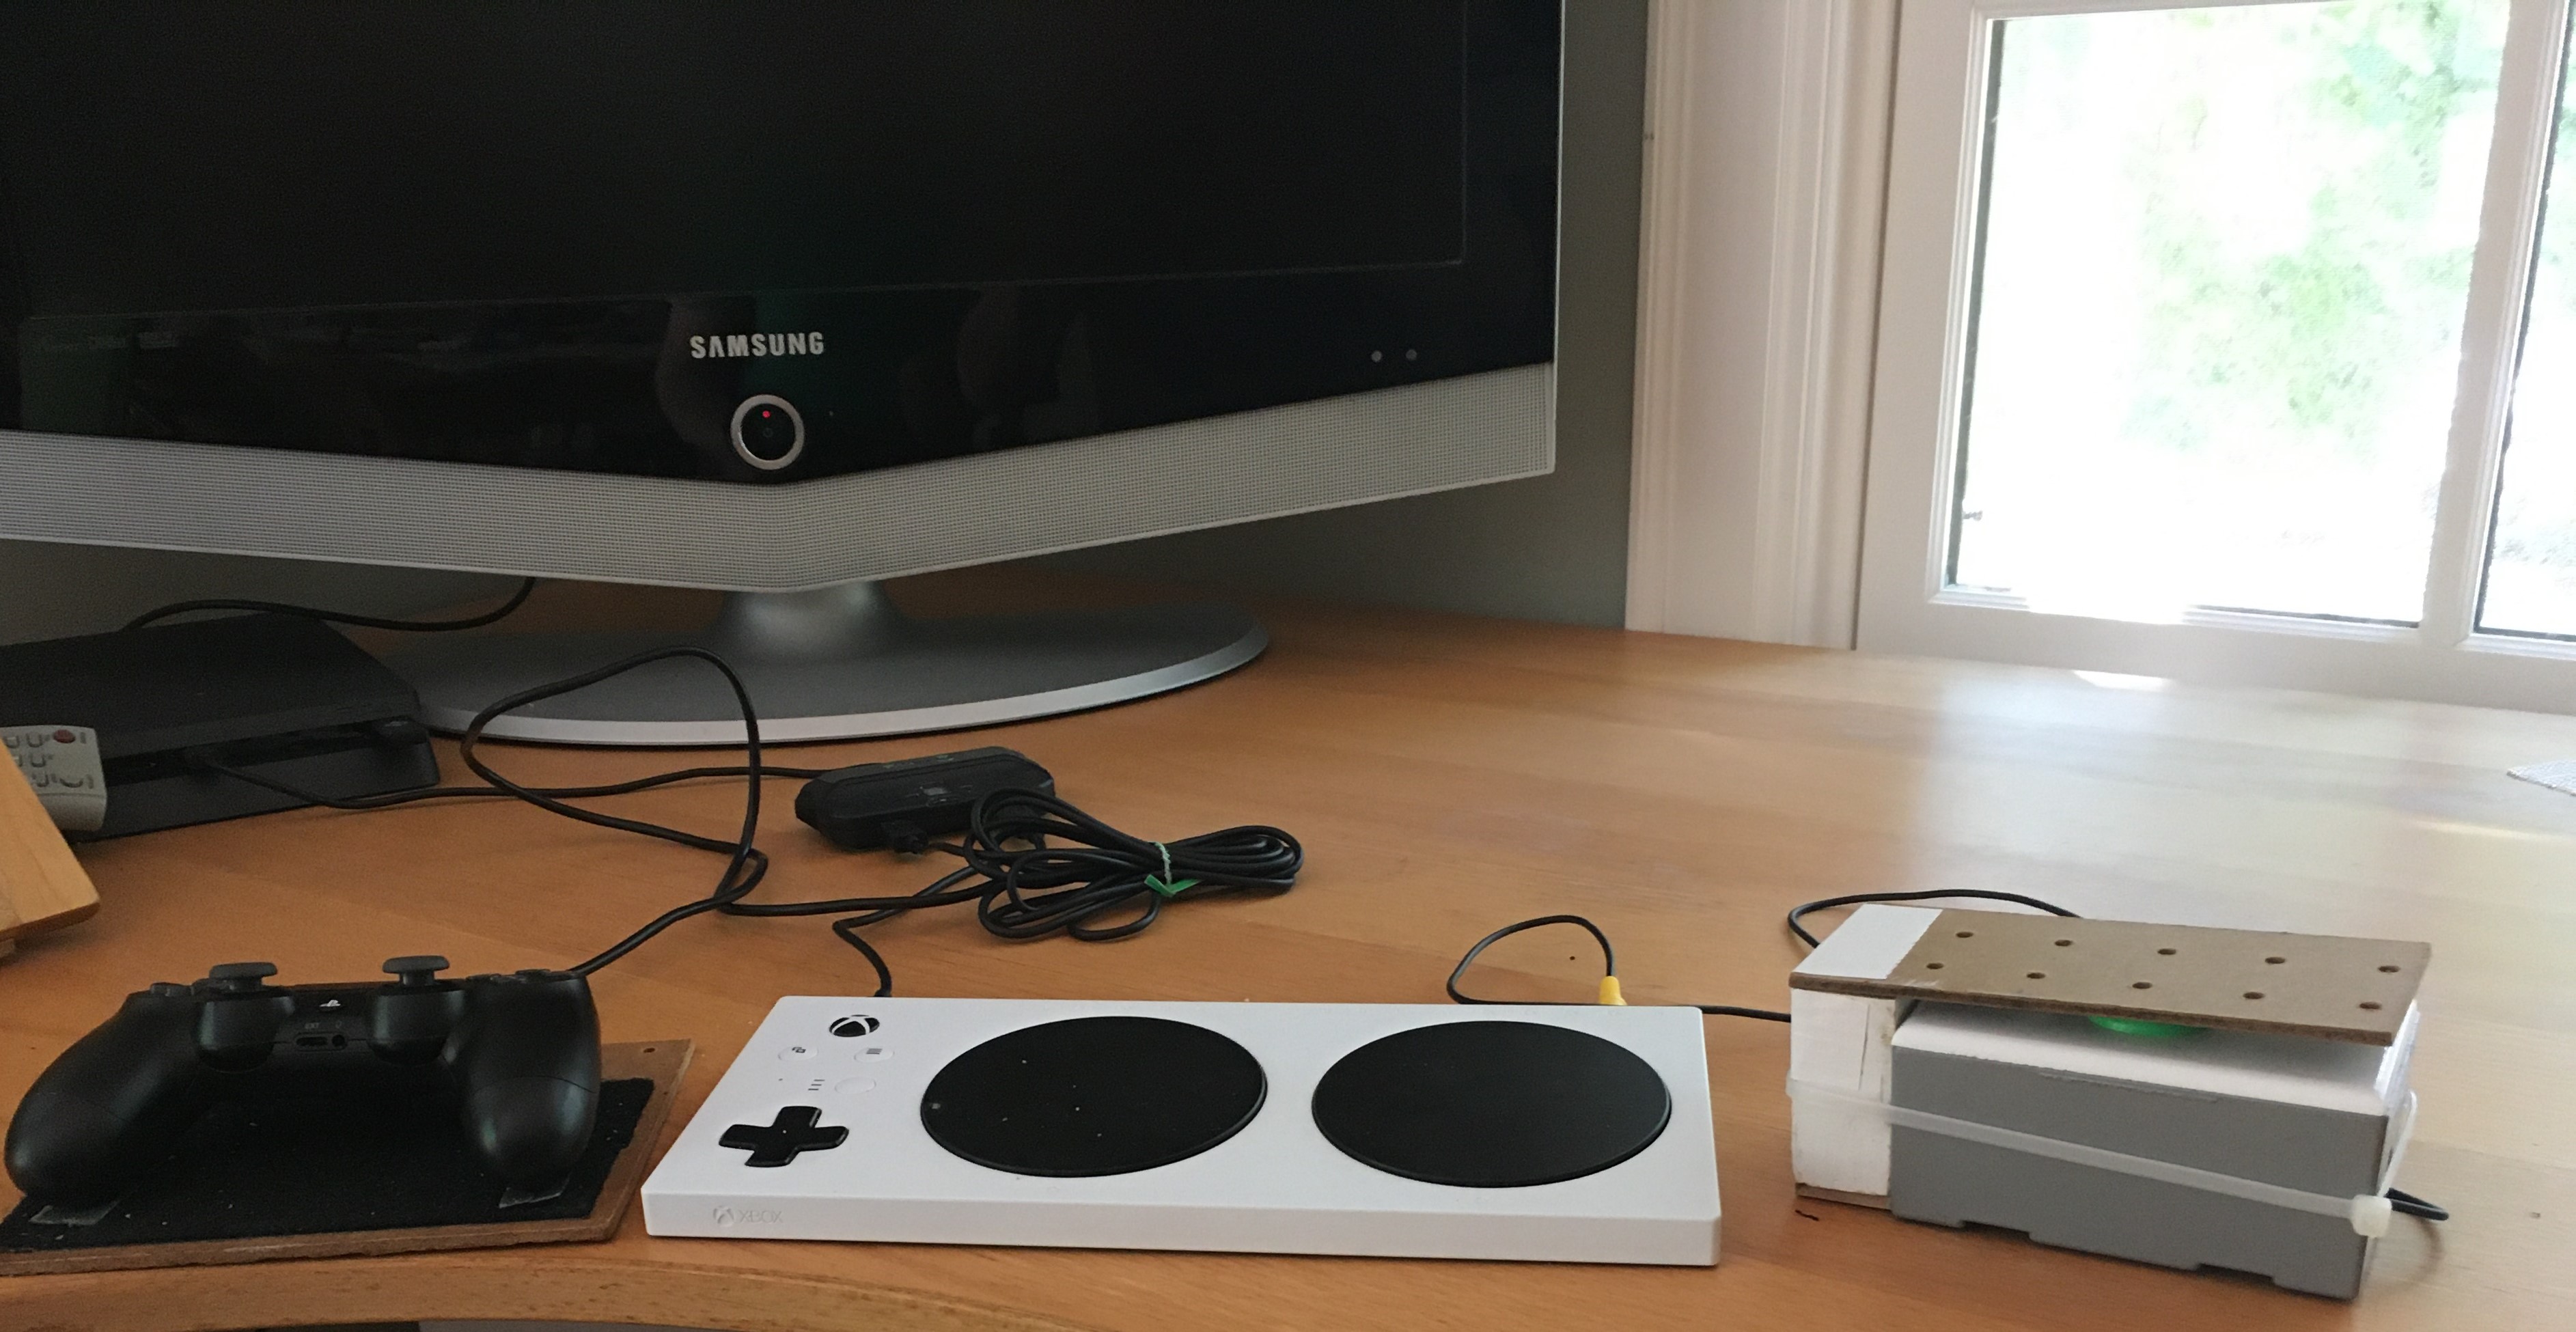 Sam Graves' Xbox Adaptive Controller laying on desk. To the left is a traditional video game controller attached to a wooden platform with Velcro on top. An external button switch is plugged in to the adaptive controller. Adaptive Controller and PlayStation console are plugged into the Titan Two adapter. A television is also on the desk.